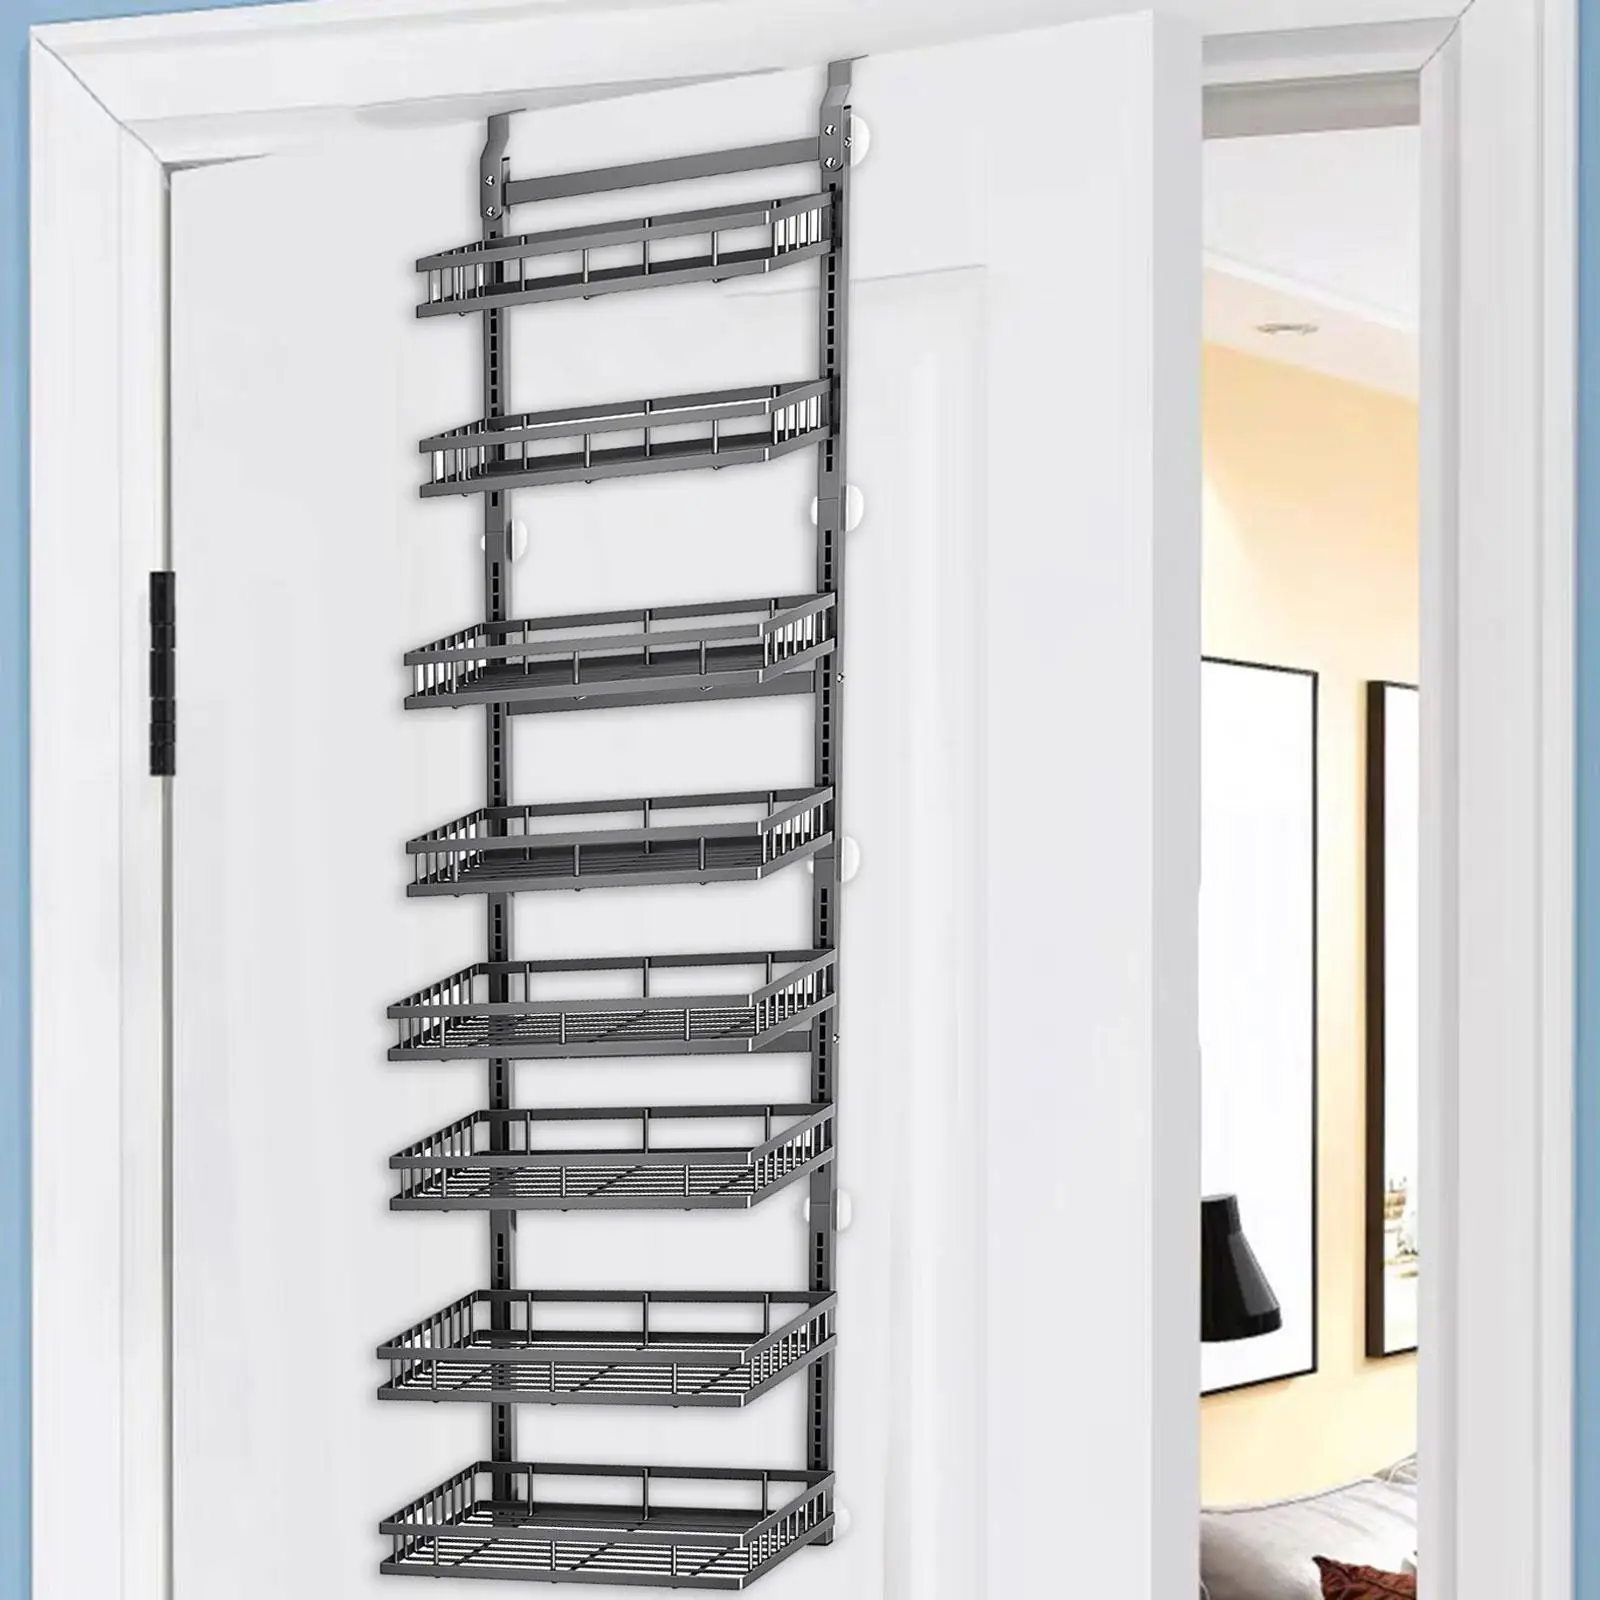 over The Door Pantry Organizer Narrow Hanging Organization Wall Mount Spice Rackstorage for Kitchen Small Apartments Bedroom